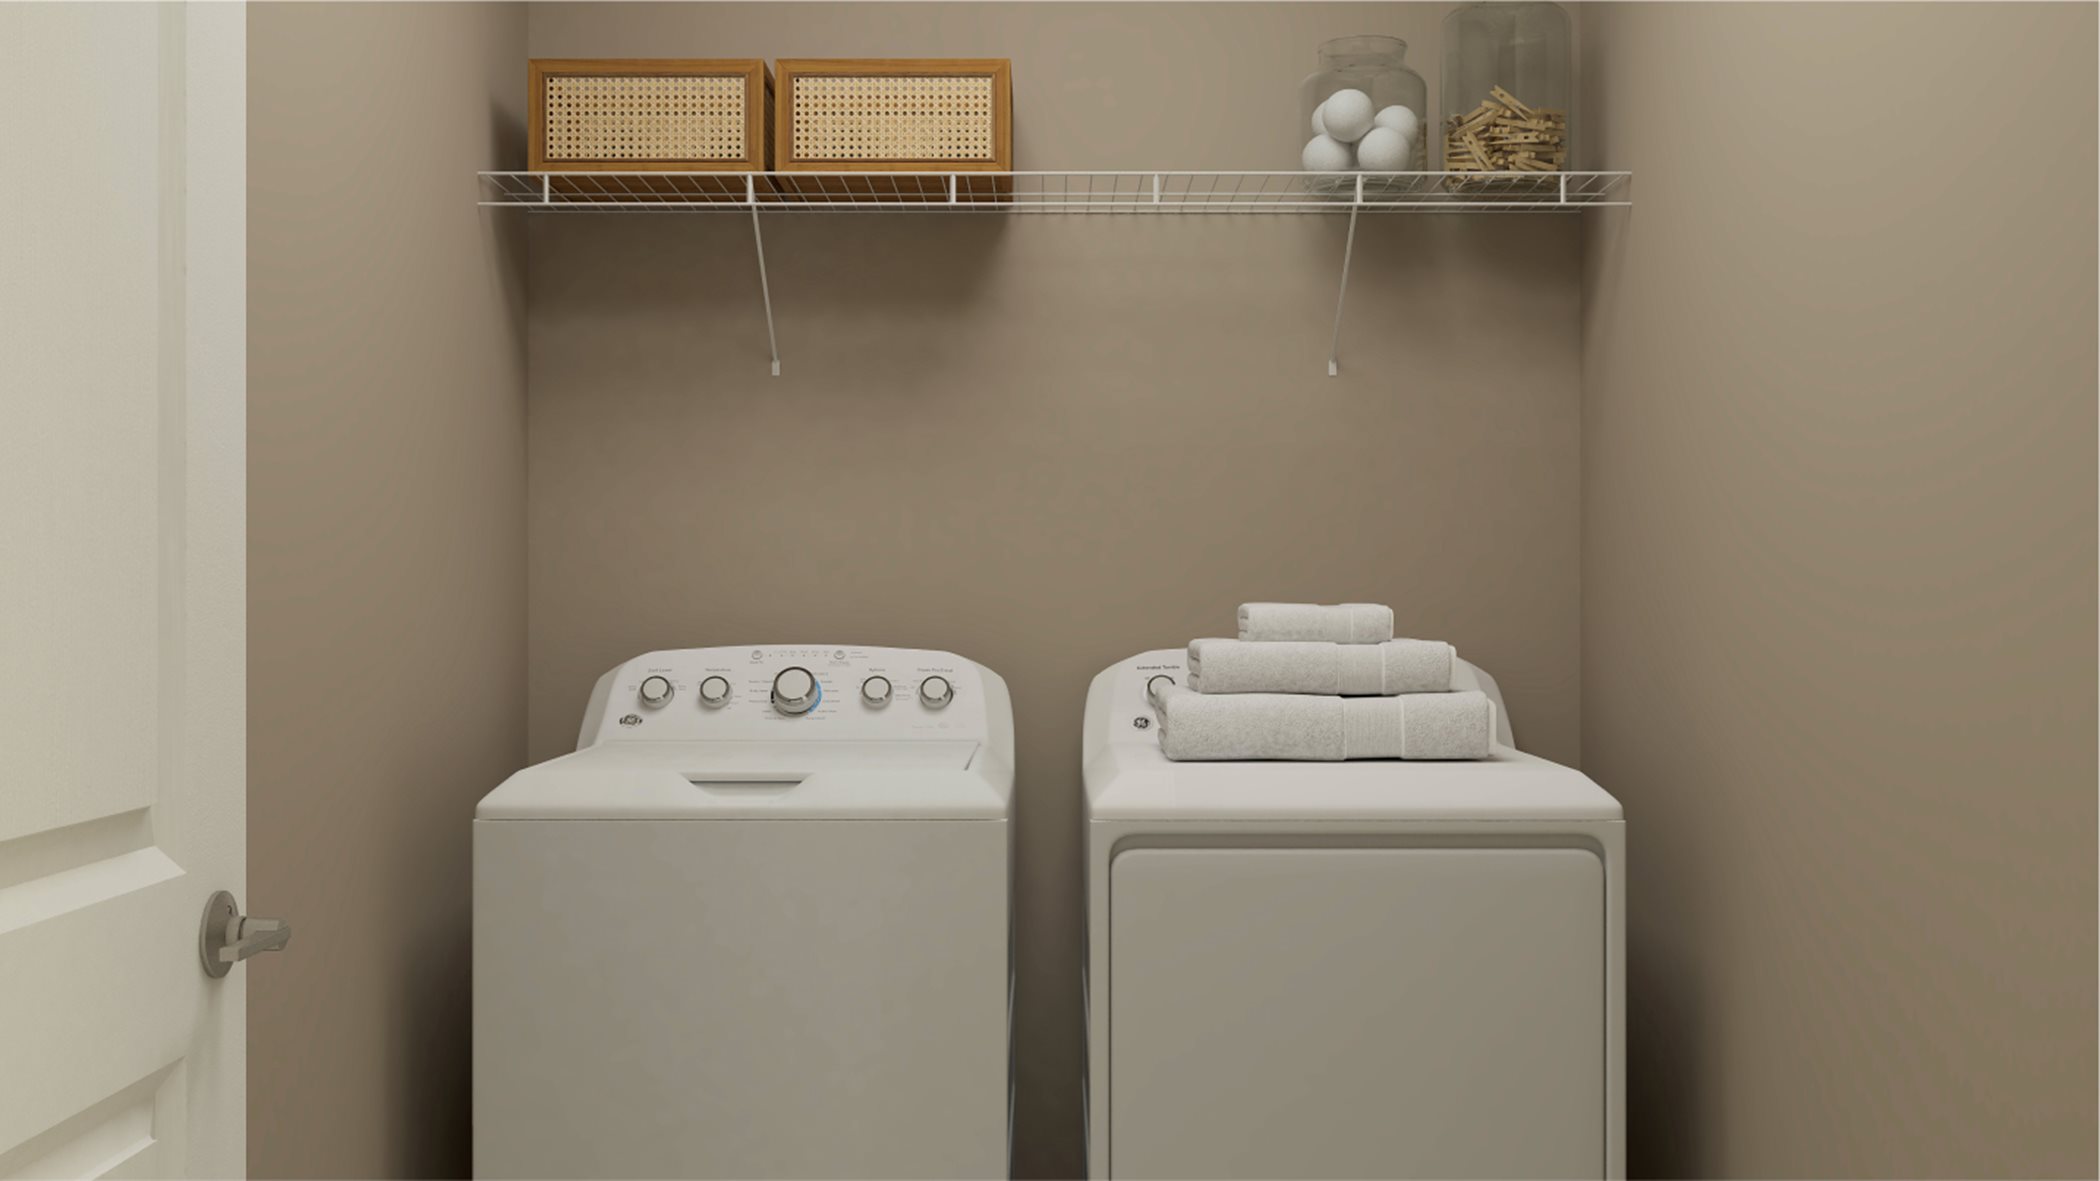 Vail plan laundry room